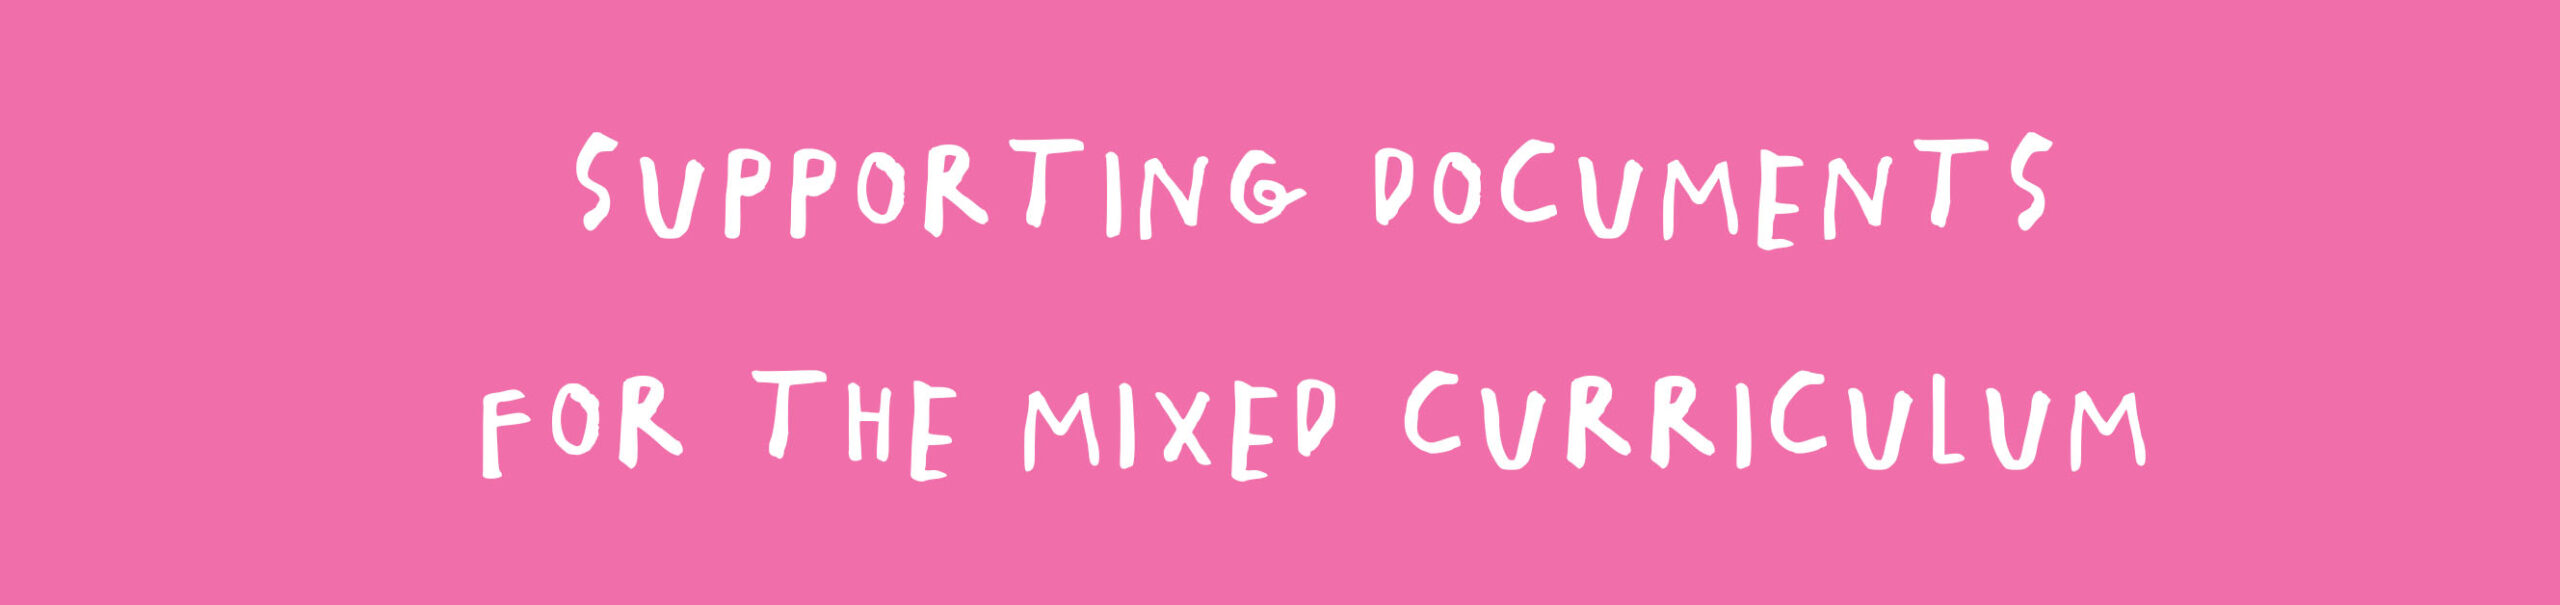 supporting docs for mixed